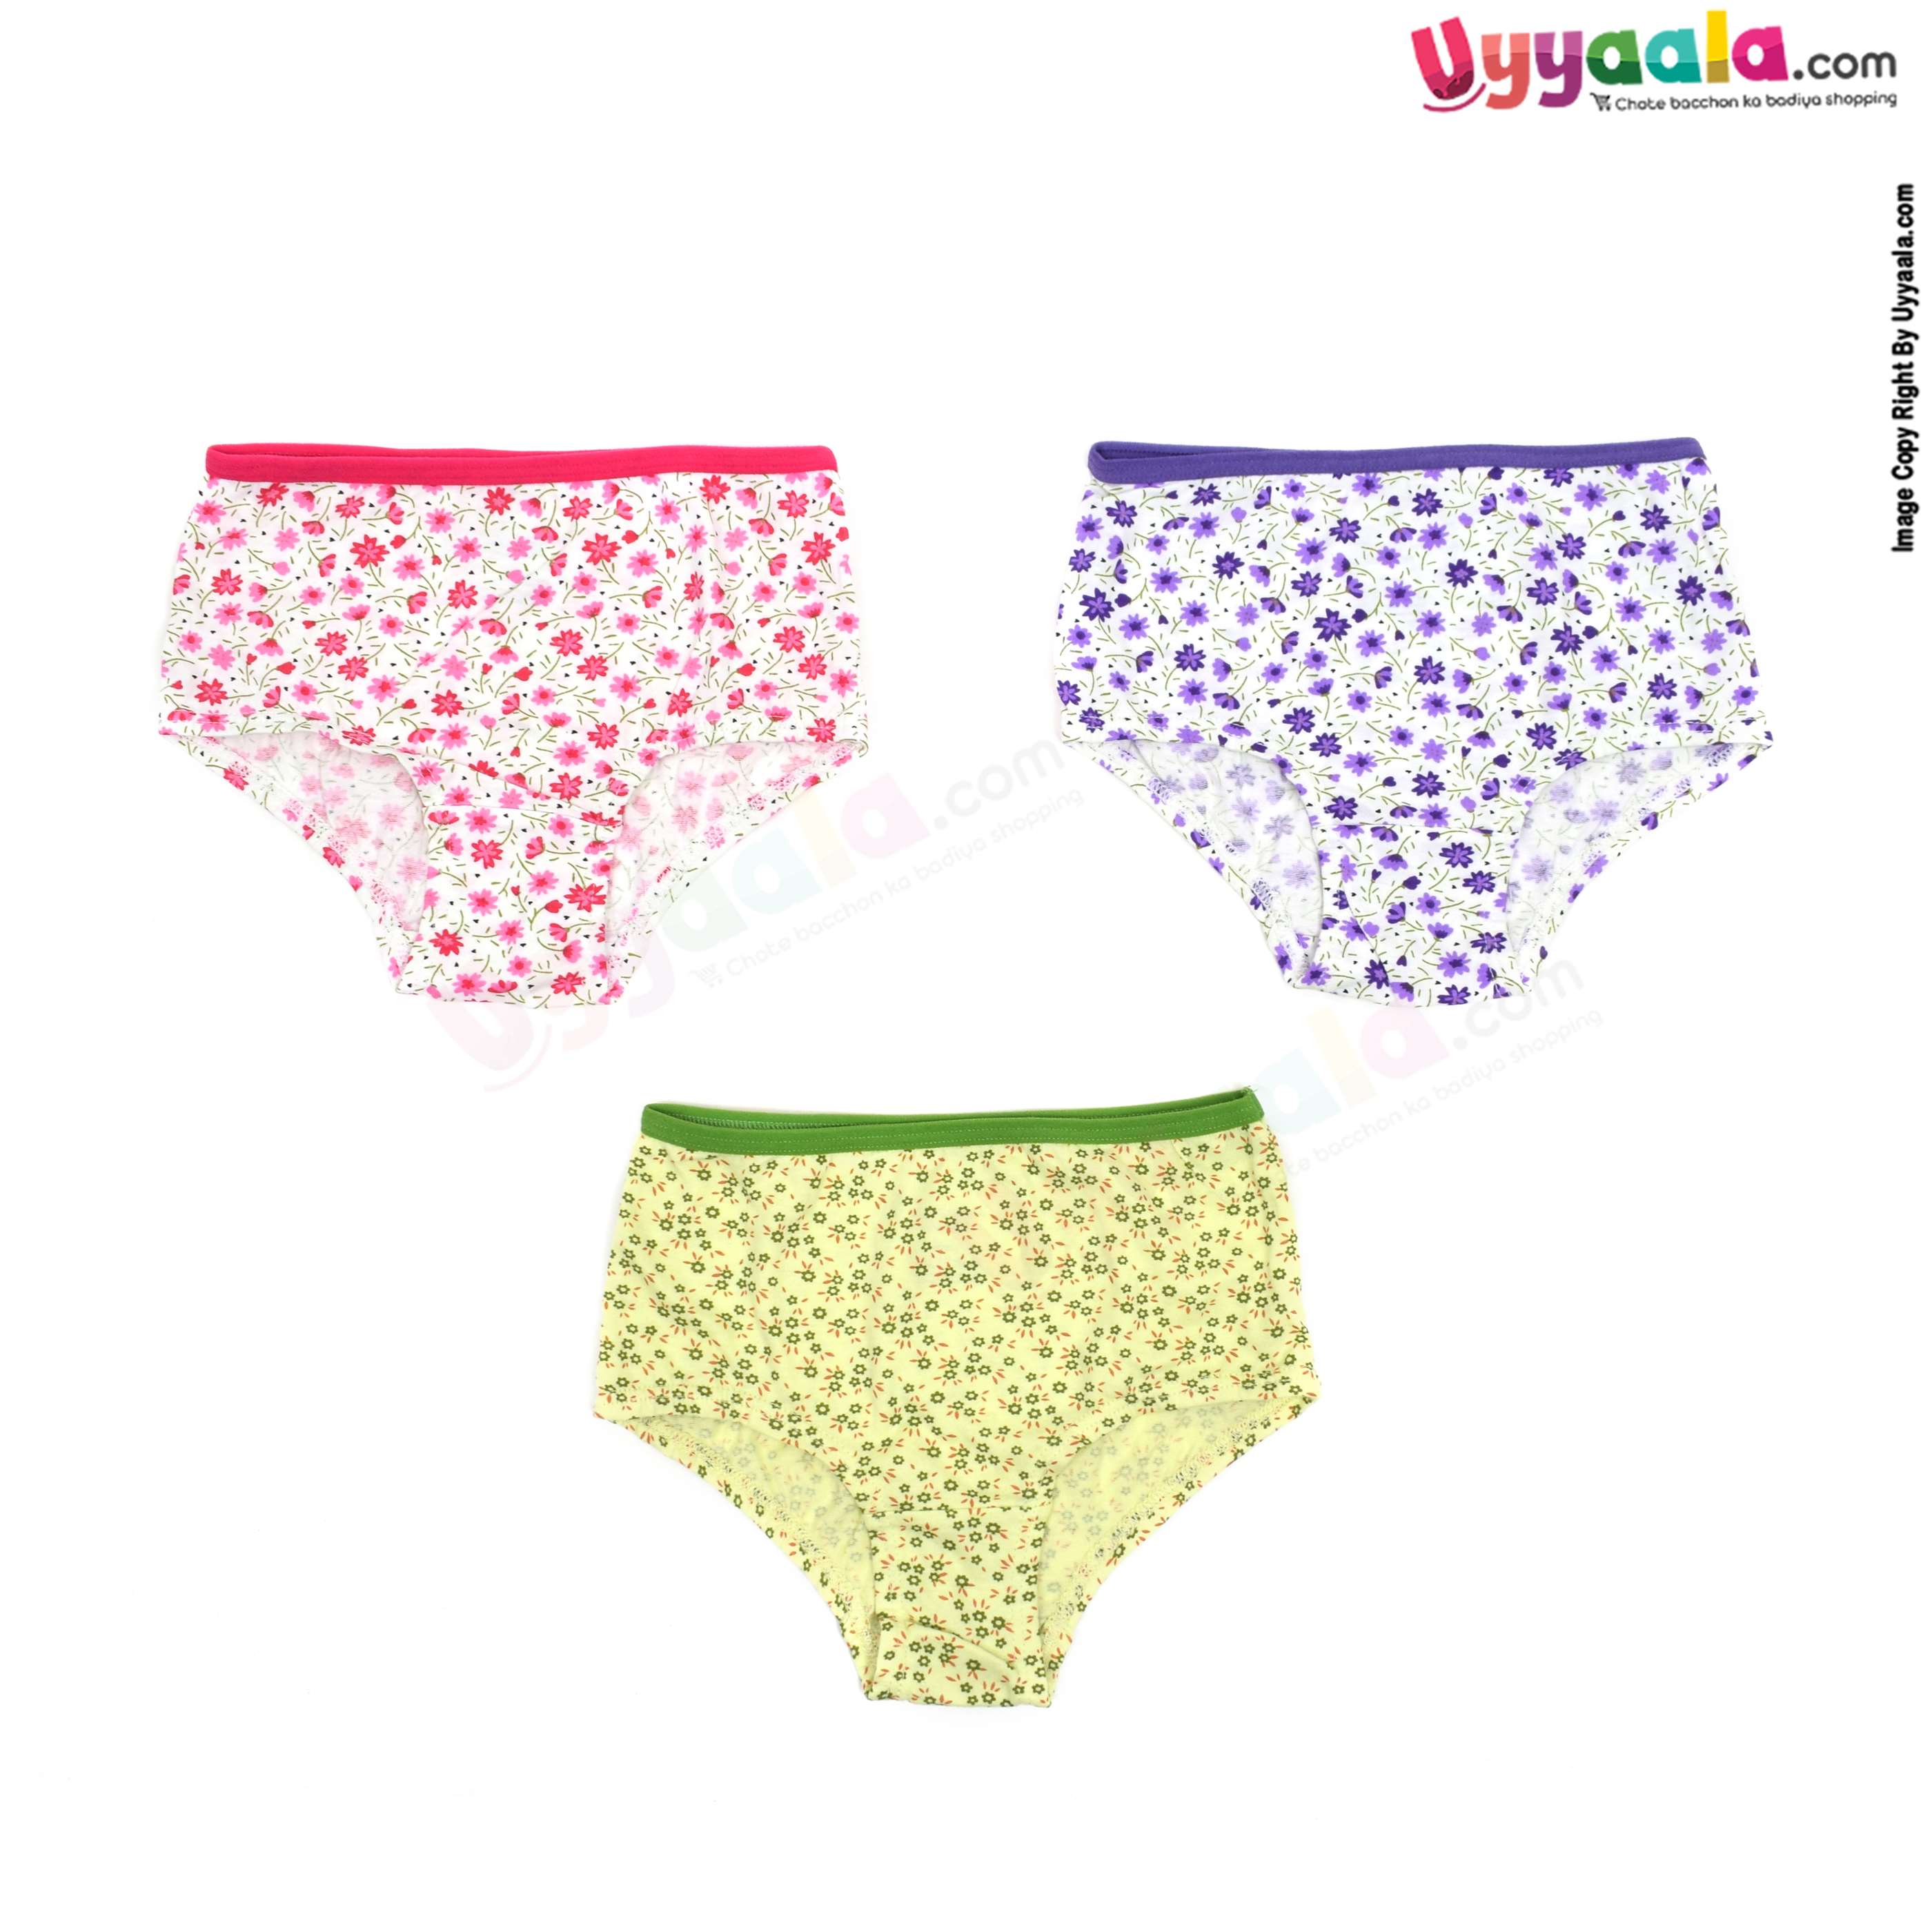 BLOSSOM JUNIOR Panties ,premium cotton panties for baby girl, pack of 3 - white & green with fairy wisp print, 1 - 2 years